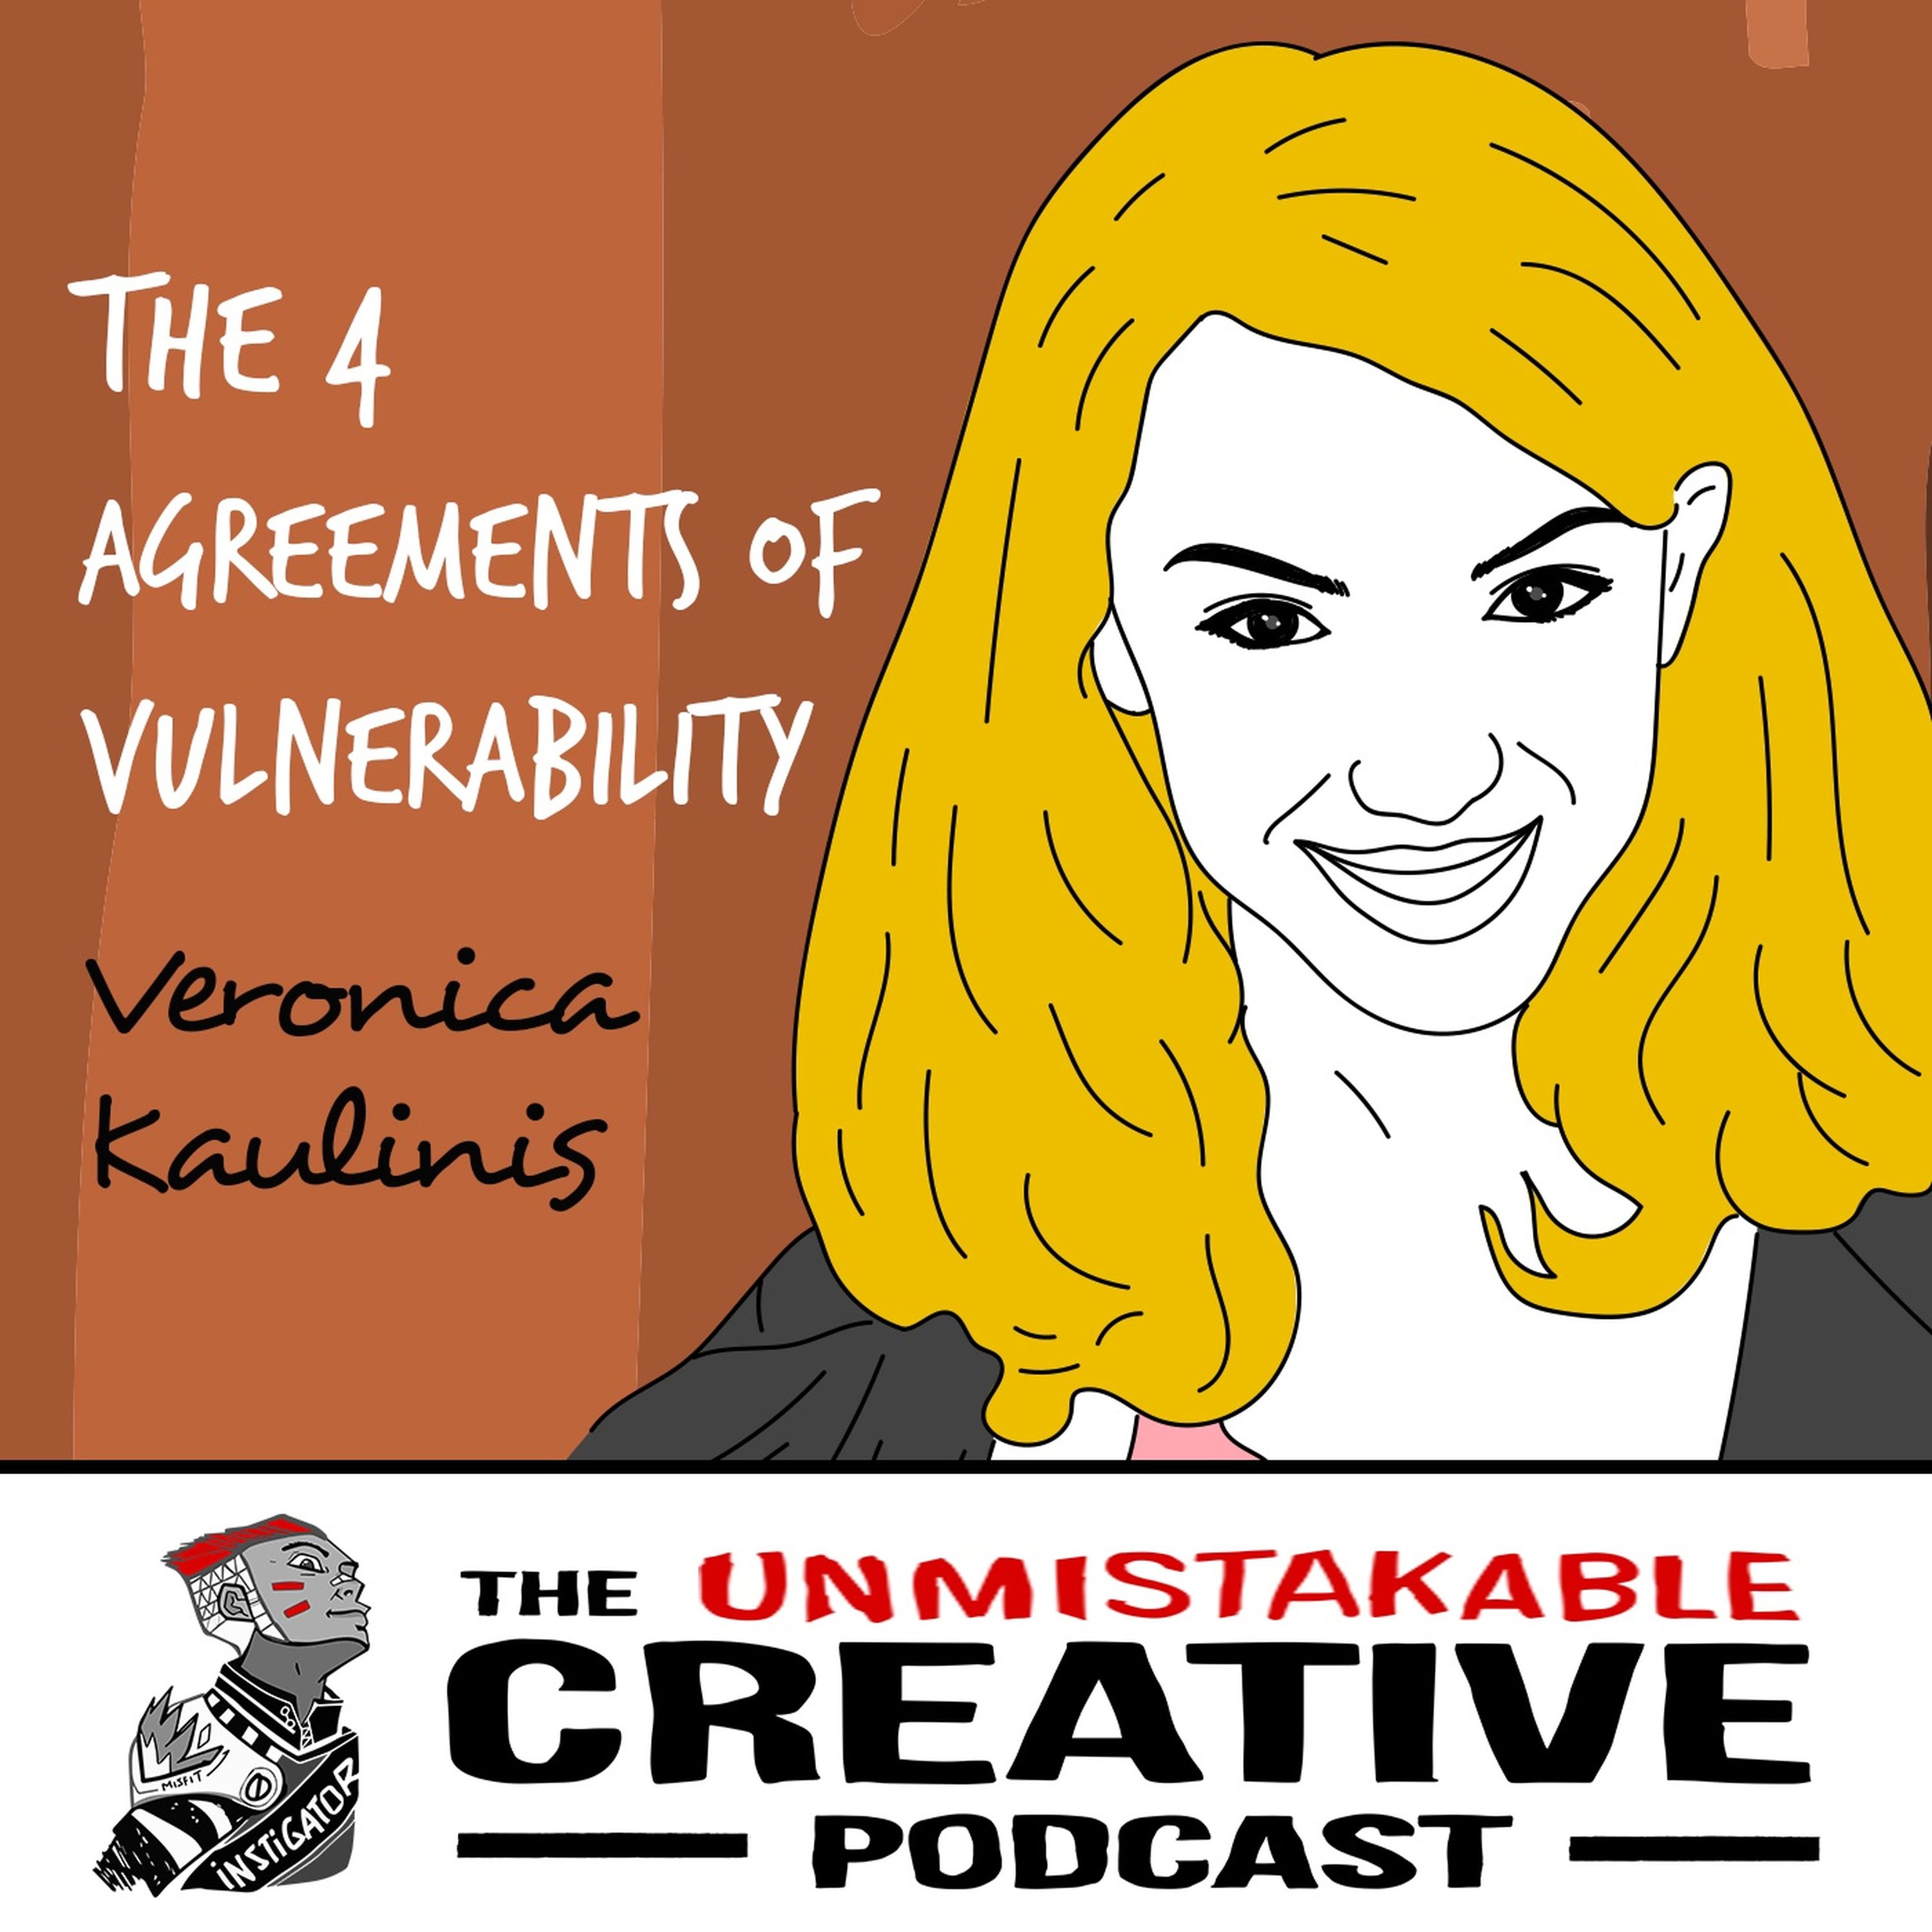 Veronica Kaulinis | The Four Agreements of Vulnerability Image